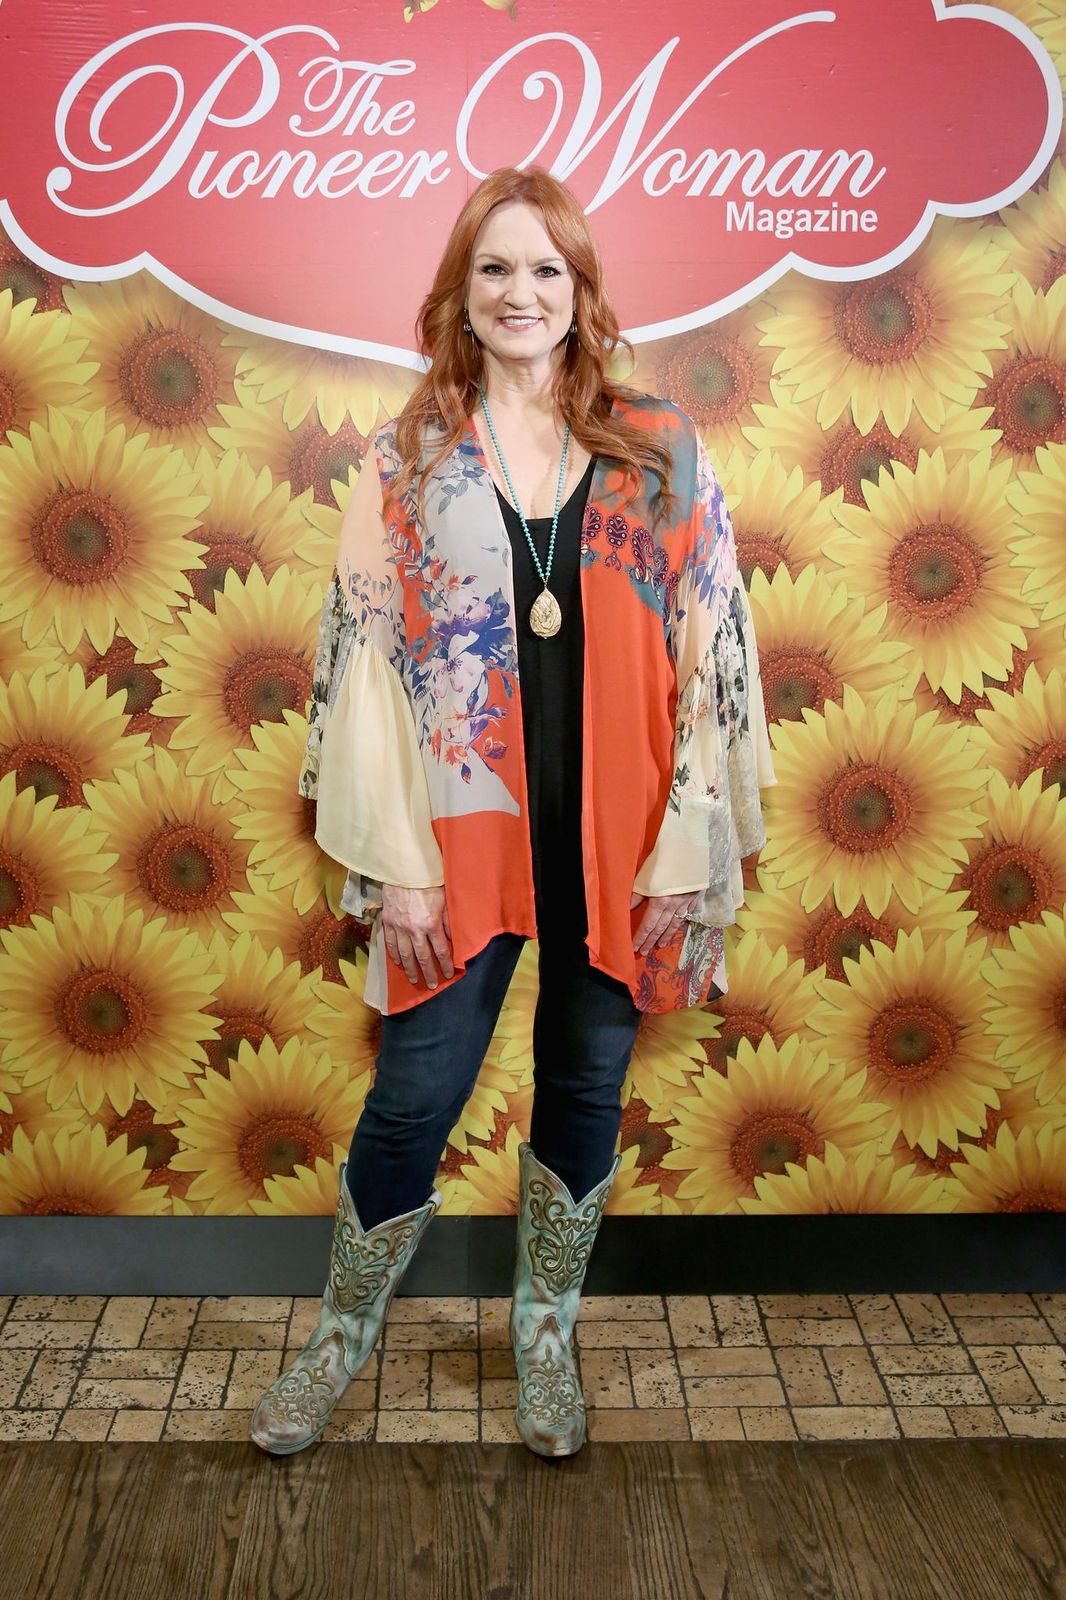 Ree Drummond at "The Pioneer Woman Magazine Celebration with Ree Drummond" on June 6, 2017. | Photo: Getty Images